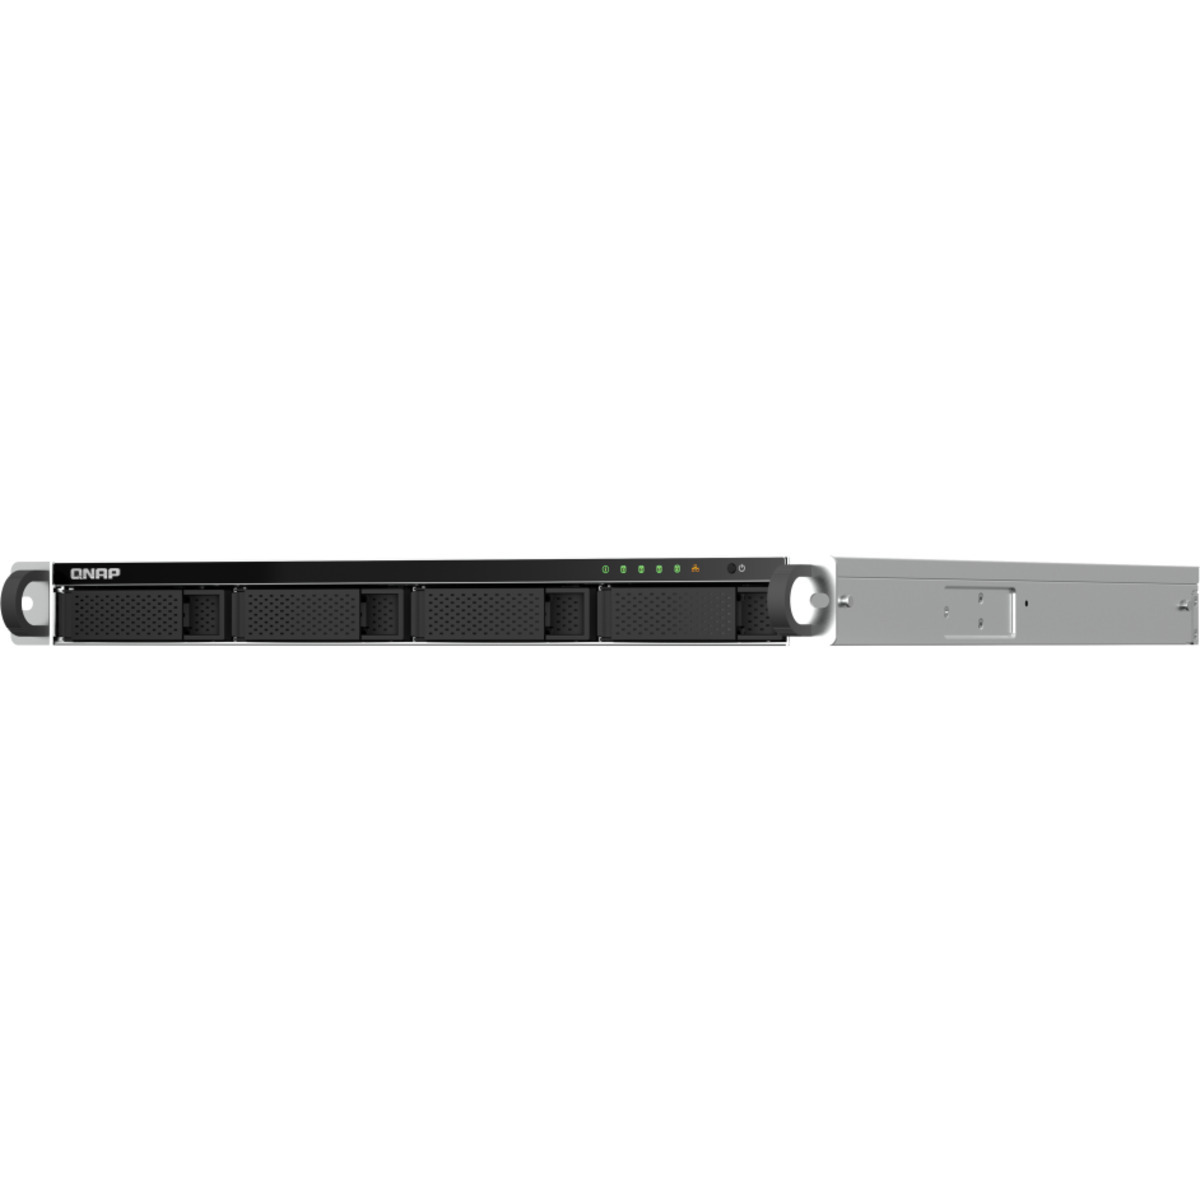 buy QNAP TS-464U 16tb RackMount NAS - Network Attached Storage Device 4x4000gb Samsung 870 EVO MZ-77E4T0BAM 2.5 560/530MB/s SATA 6Gb/s SSD CONSUMER Class Drives Installed - Burn-In Tested - nas headquarters buy network attached storage server device das new raid-5 free shipping usa spring sale TS-464U